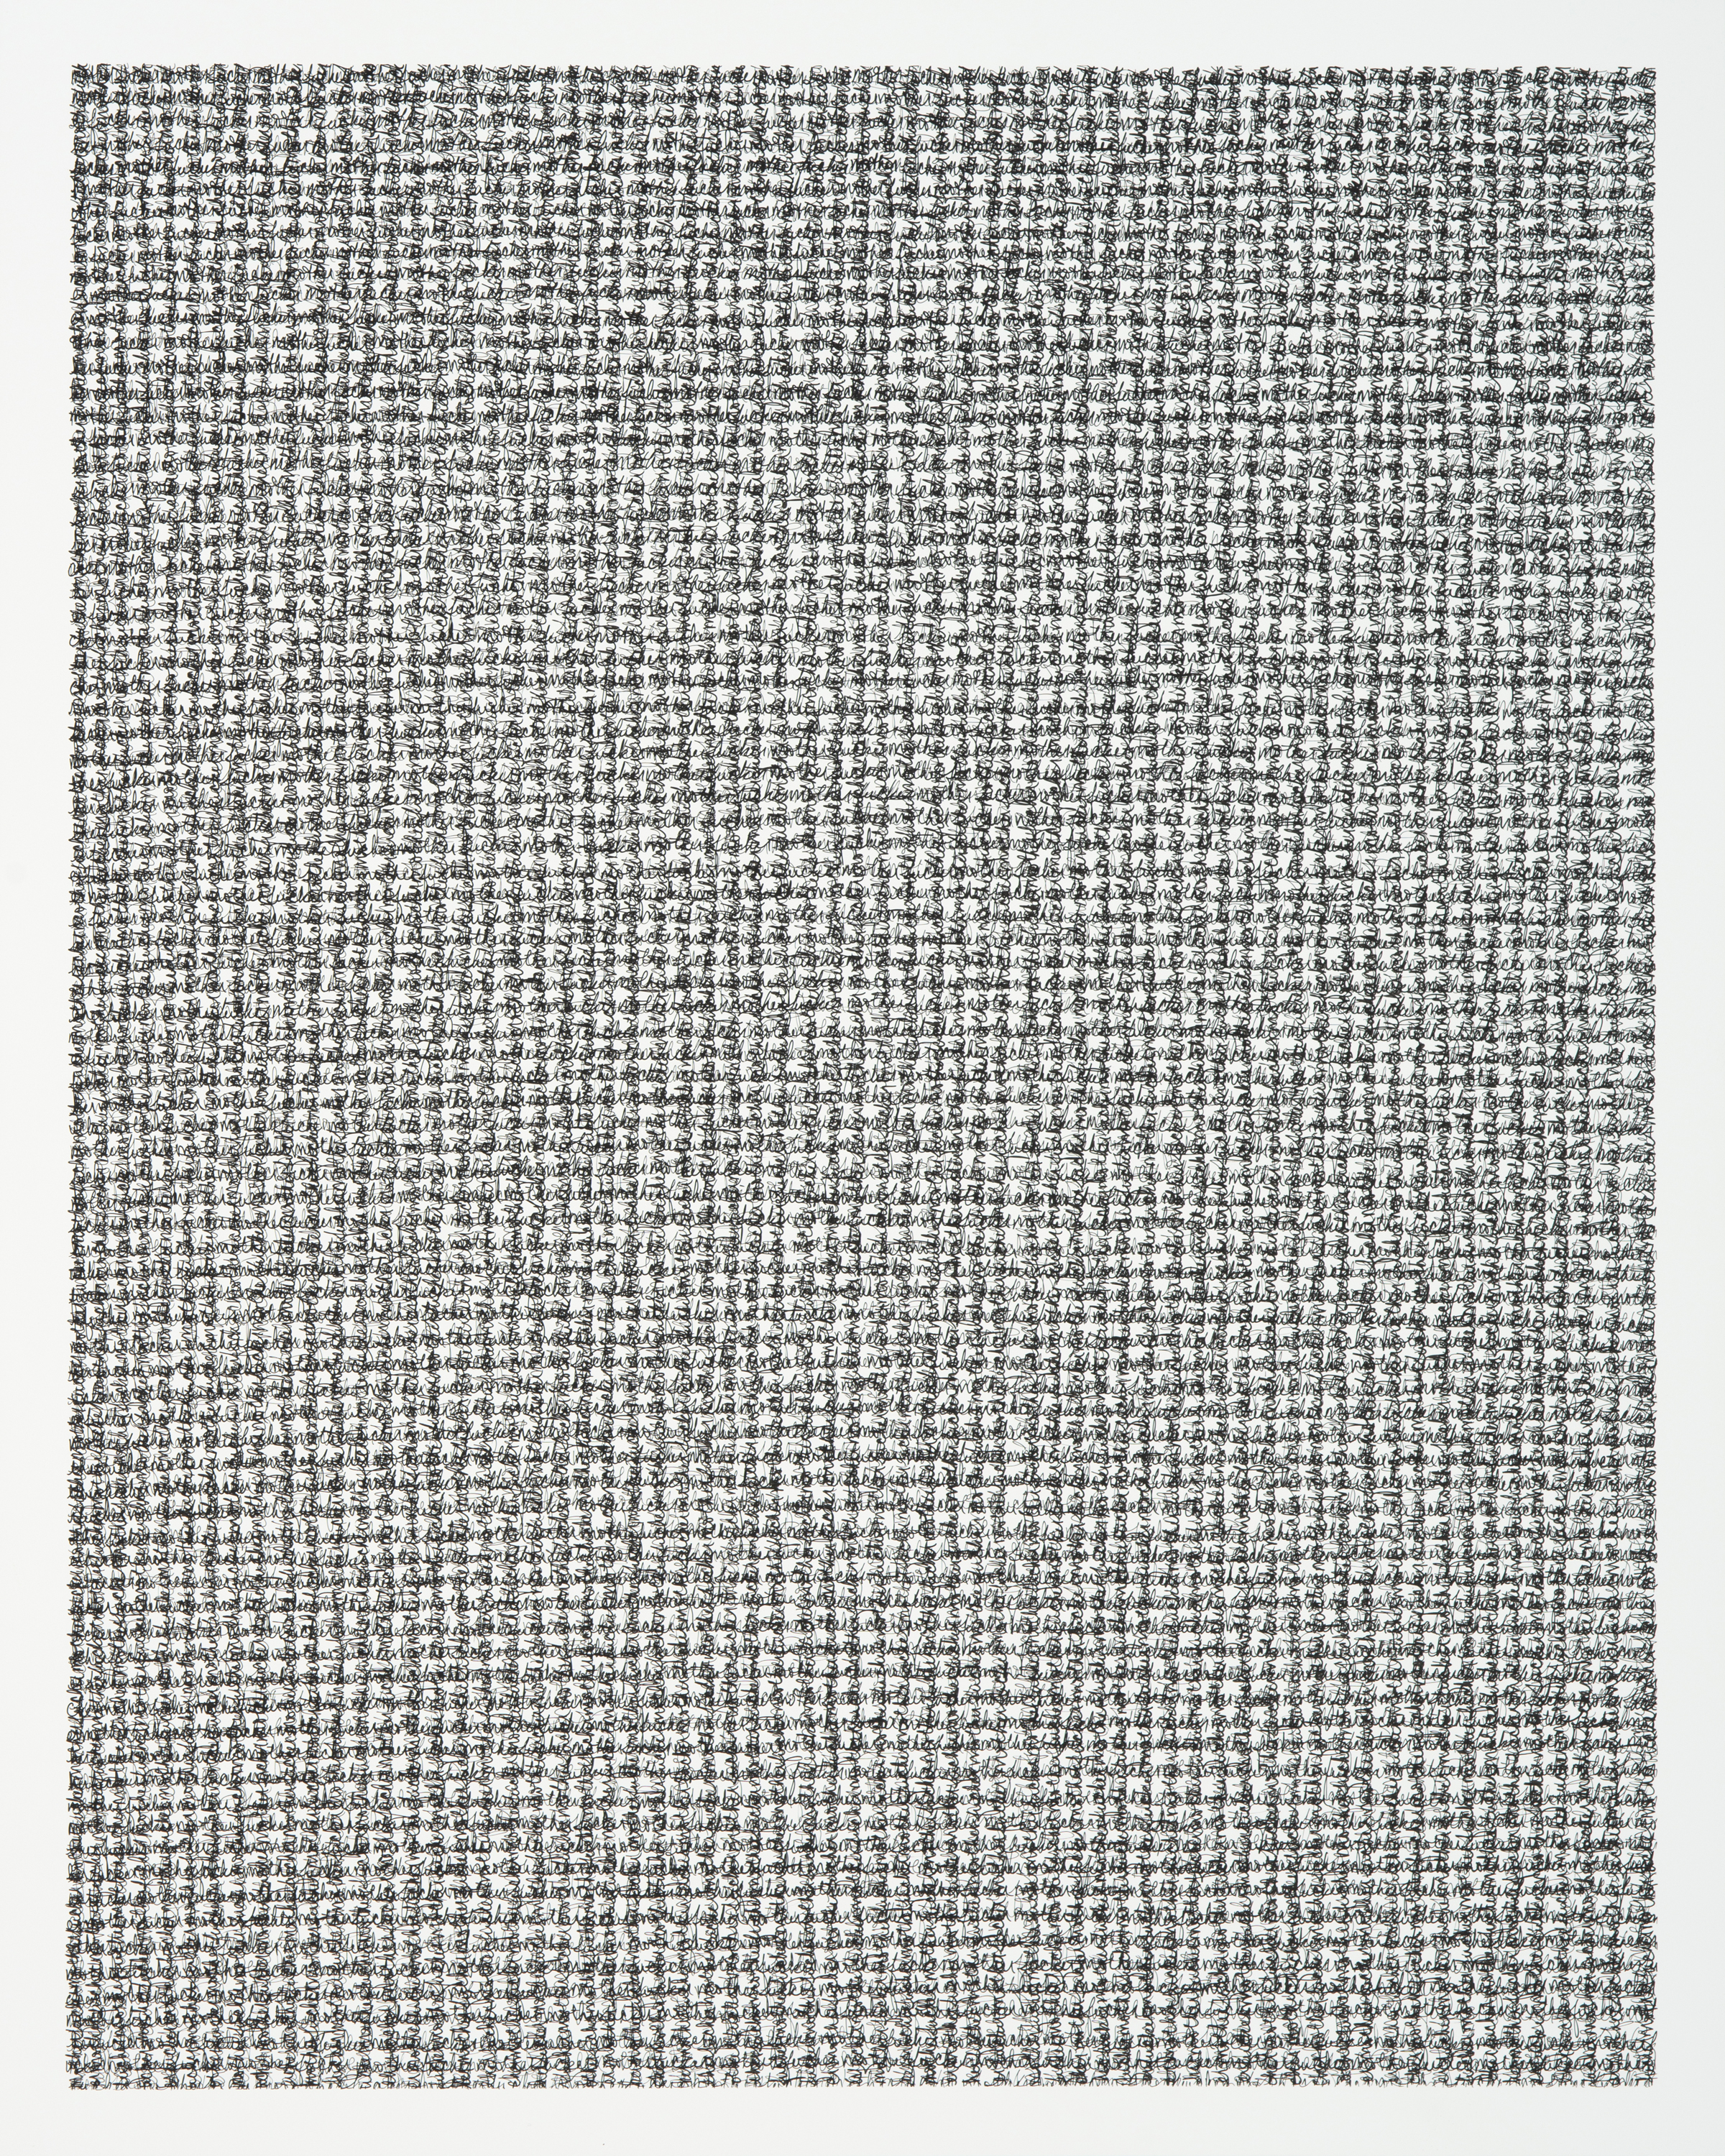 motherfucker, 2017 | ink on panel | 30" x 24" x 1.5" | Private Collection, Mercer Island, WA